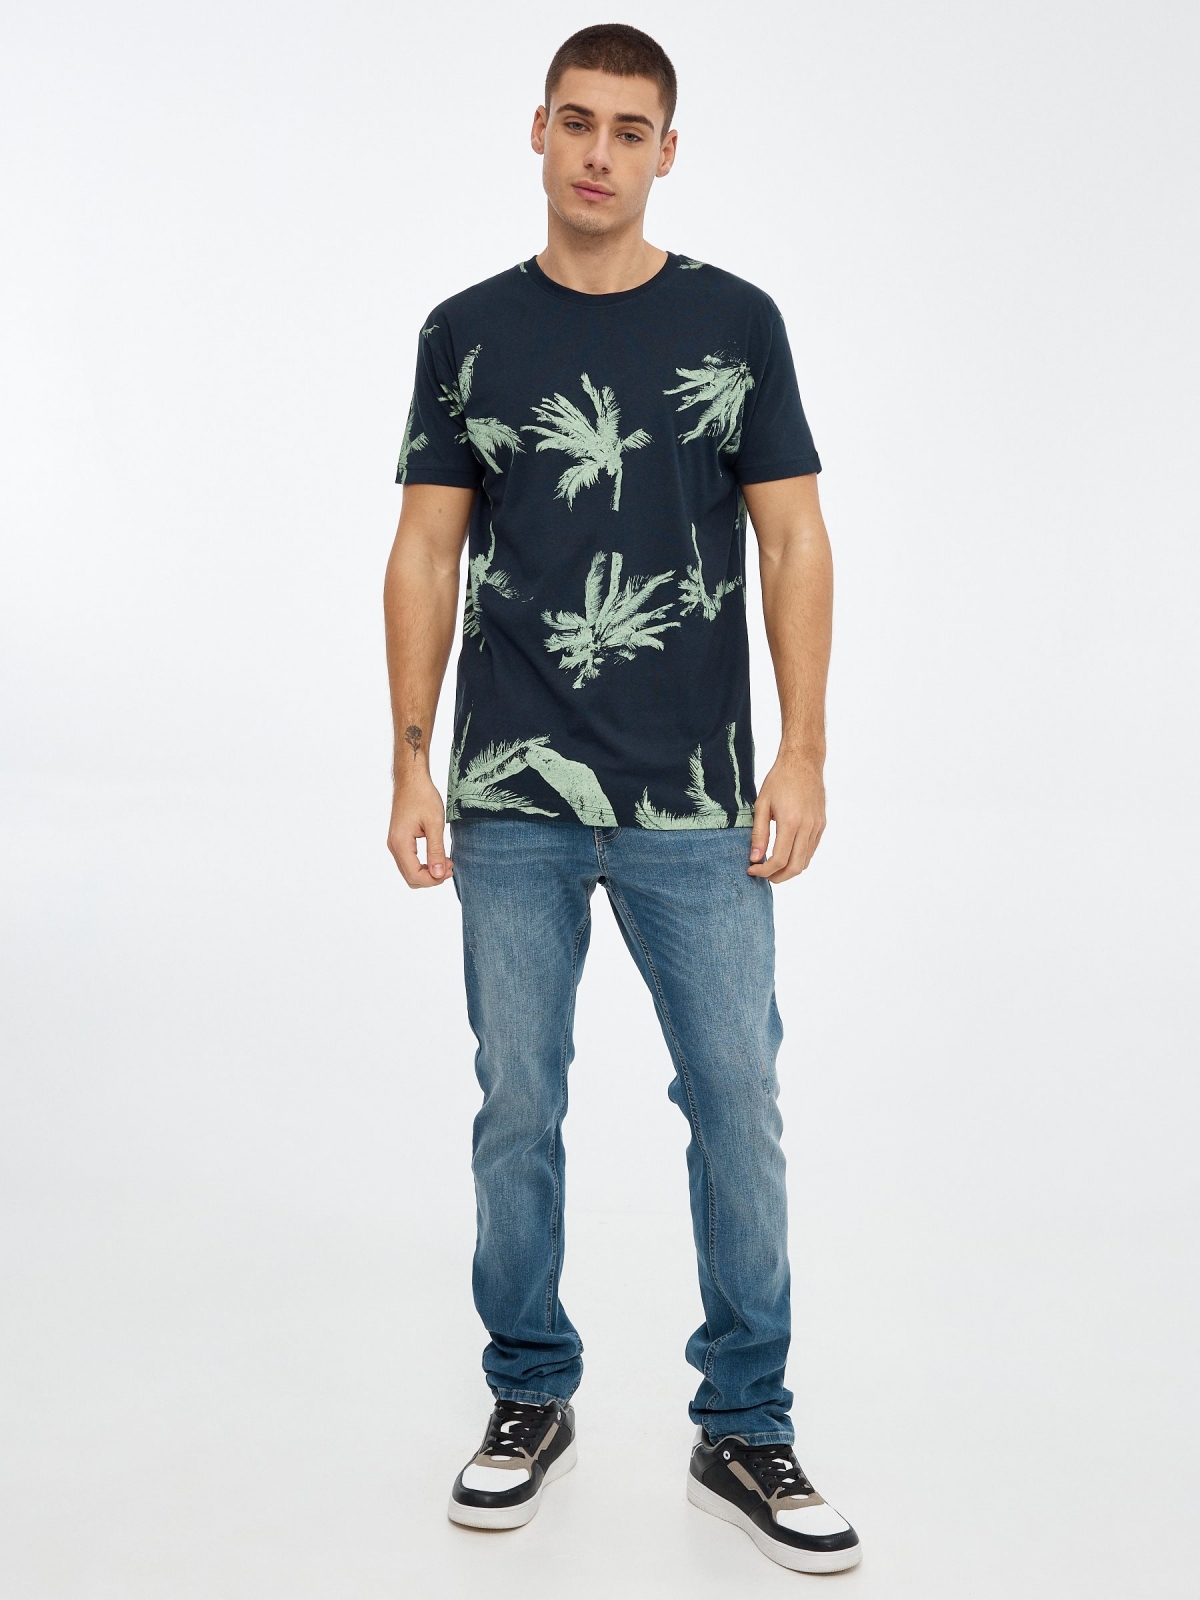 Palm tree printed t-shirt navy front view